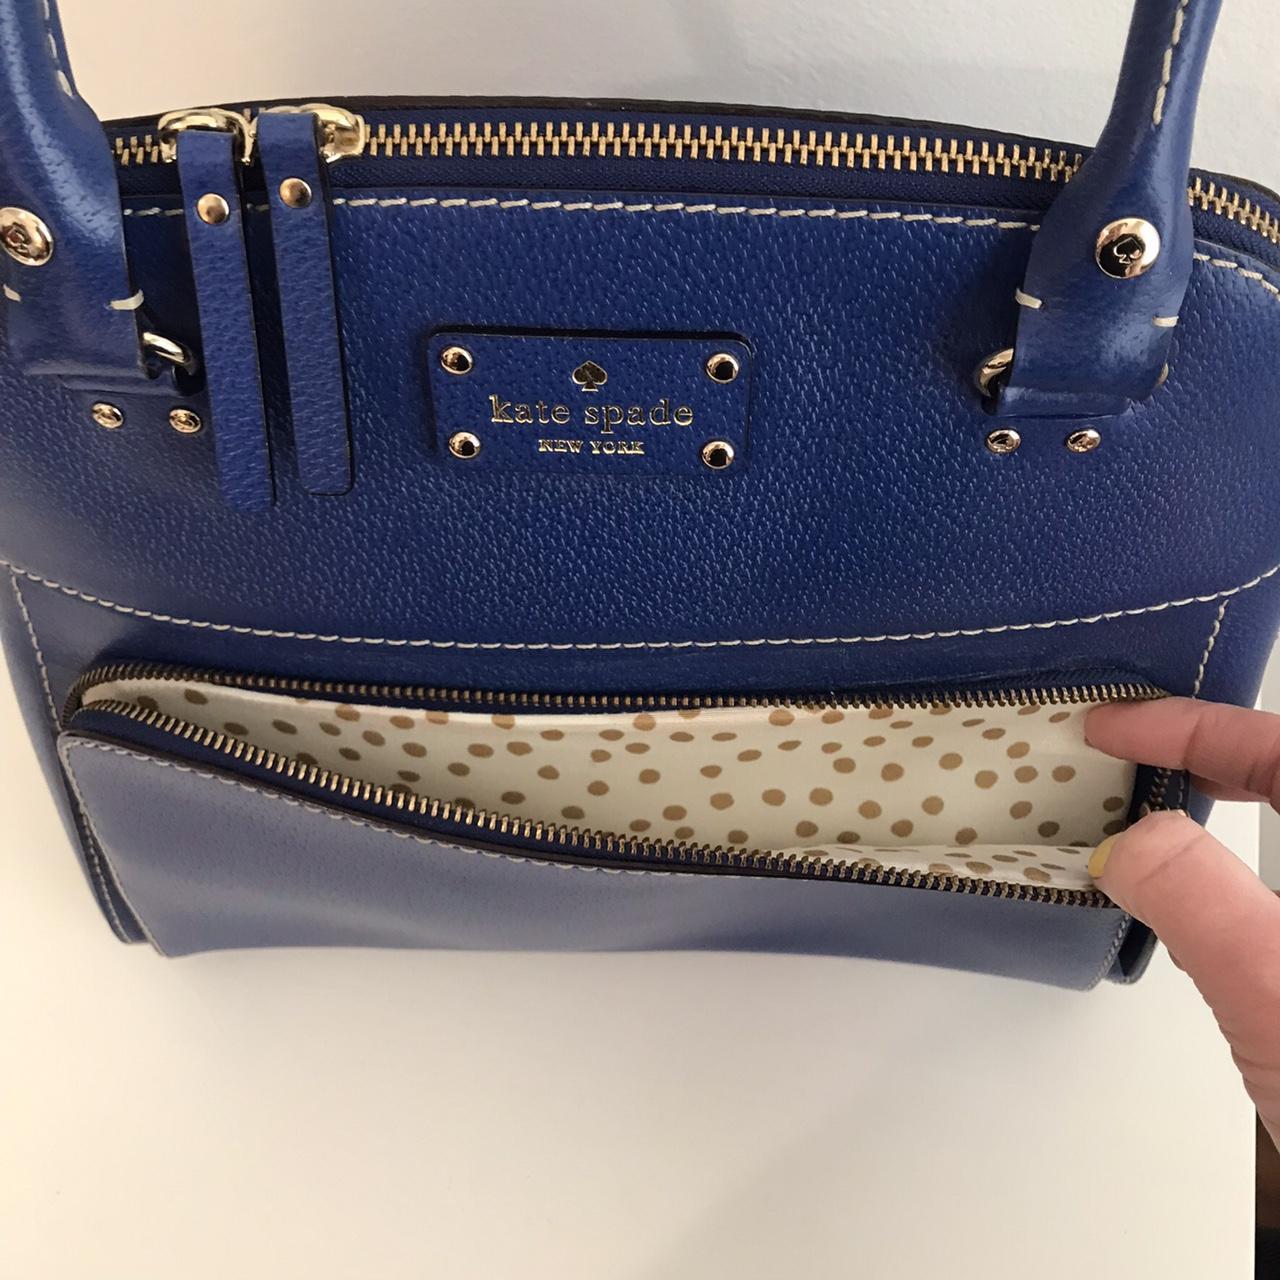 White or Blue Purse Explained